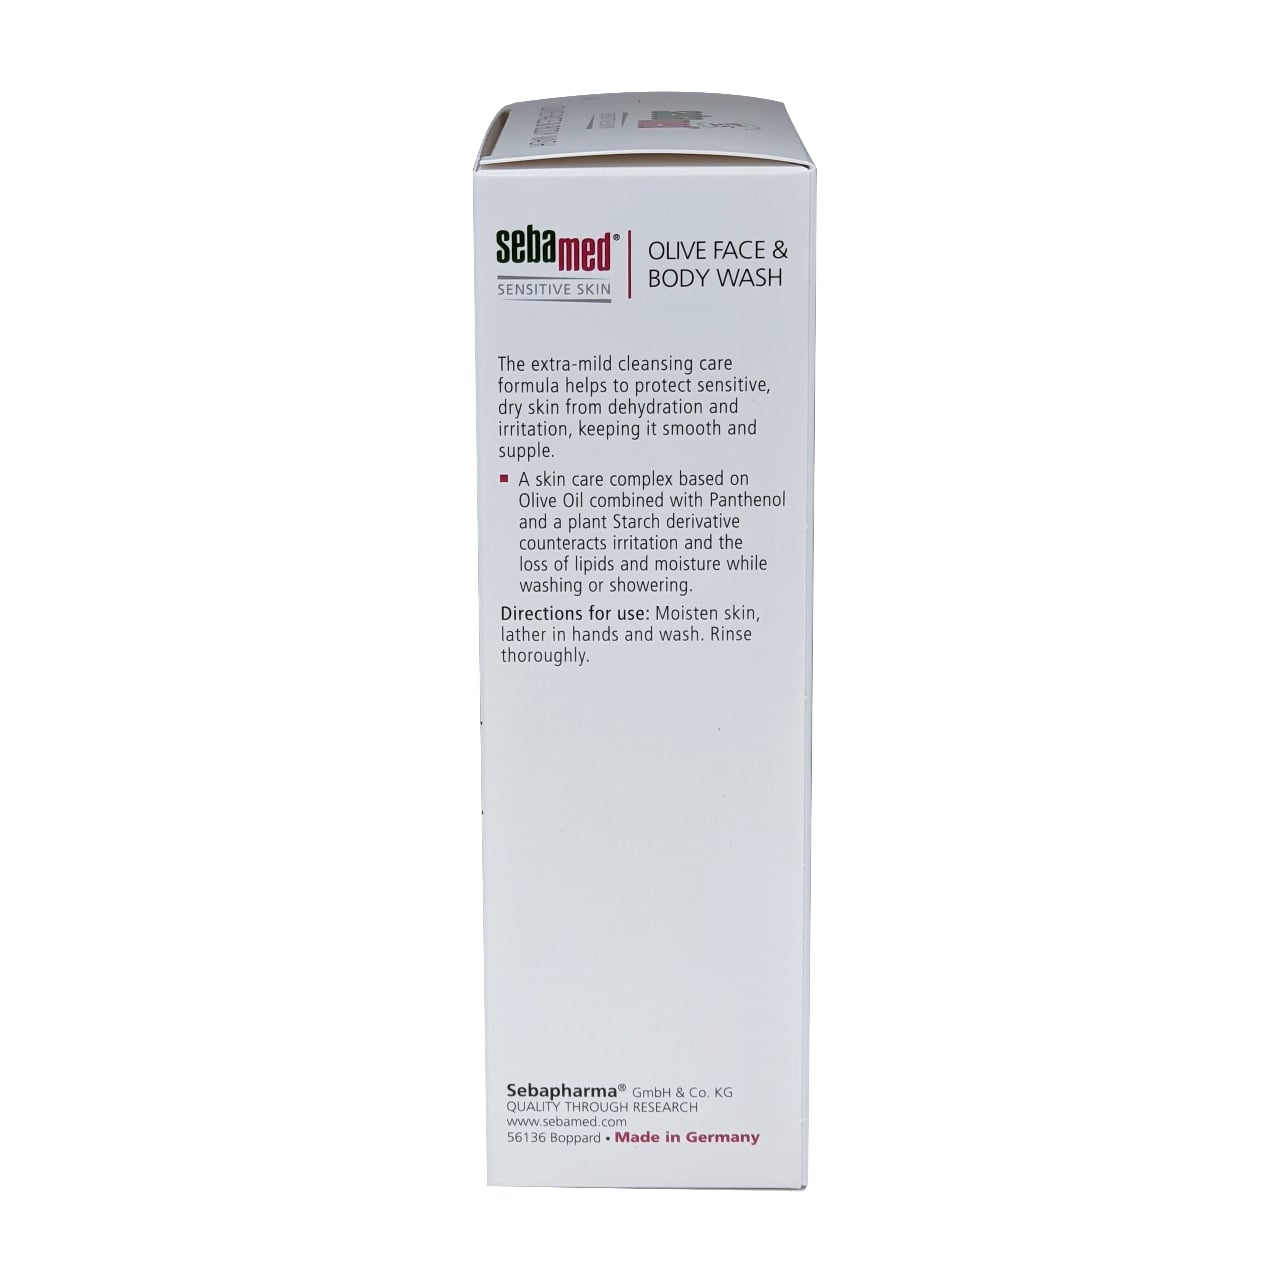 Product details and directions for Sebamed Olive Face and Body Wash